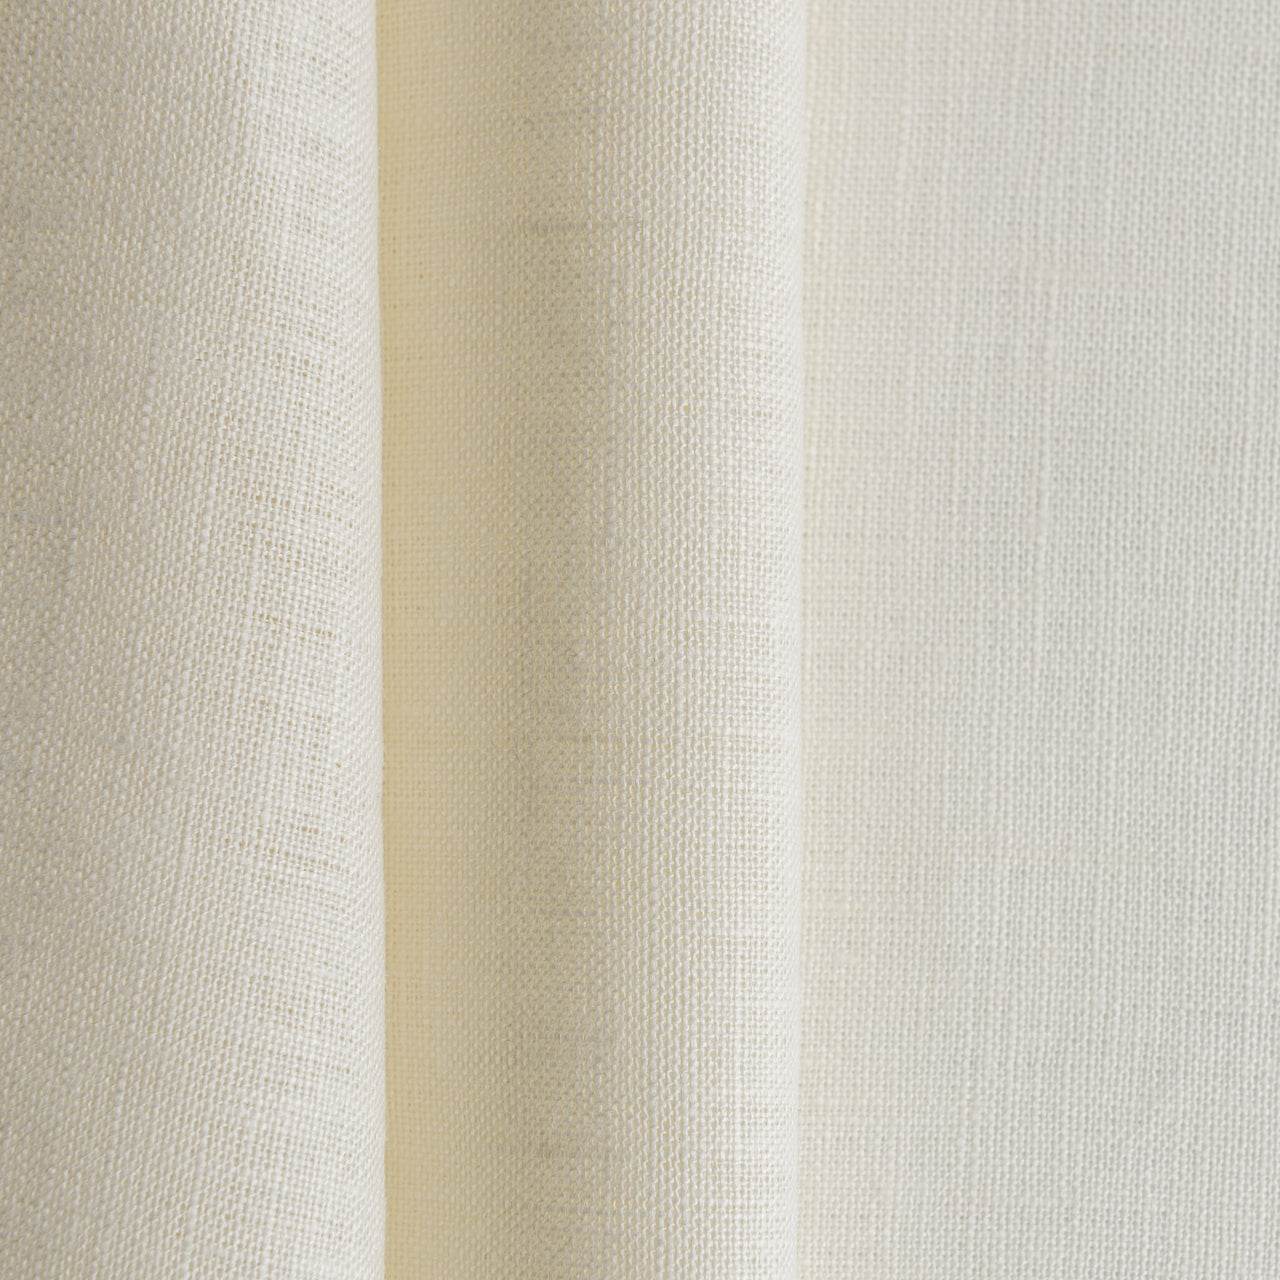 Cream Linen Fabric by the Yard - 100% French Natural - Width 52”- 106”